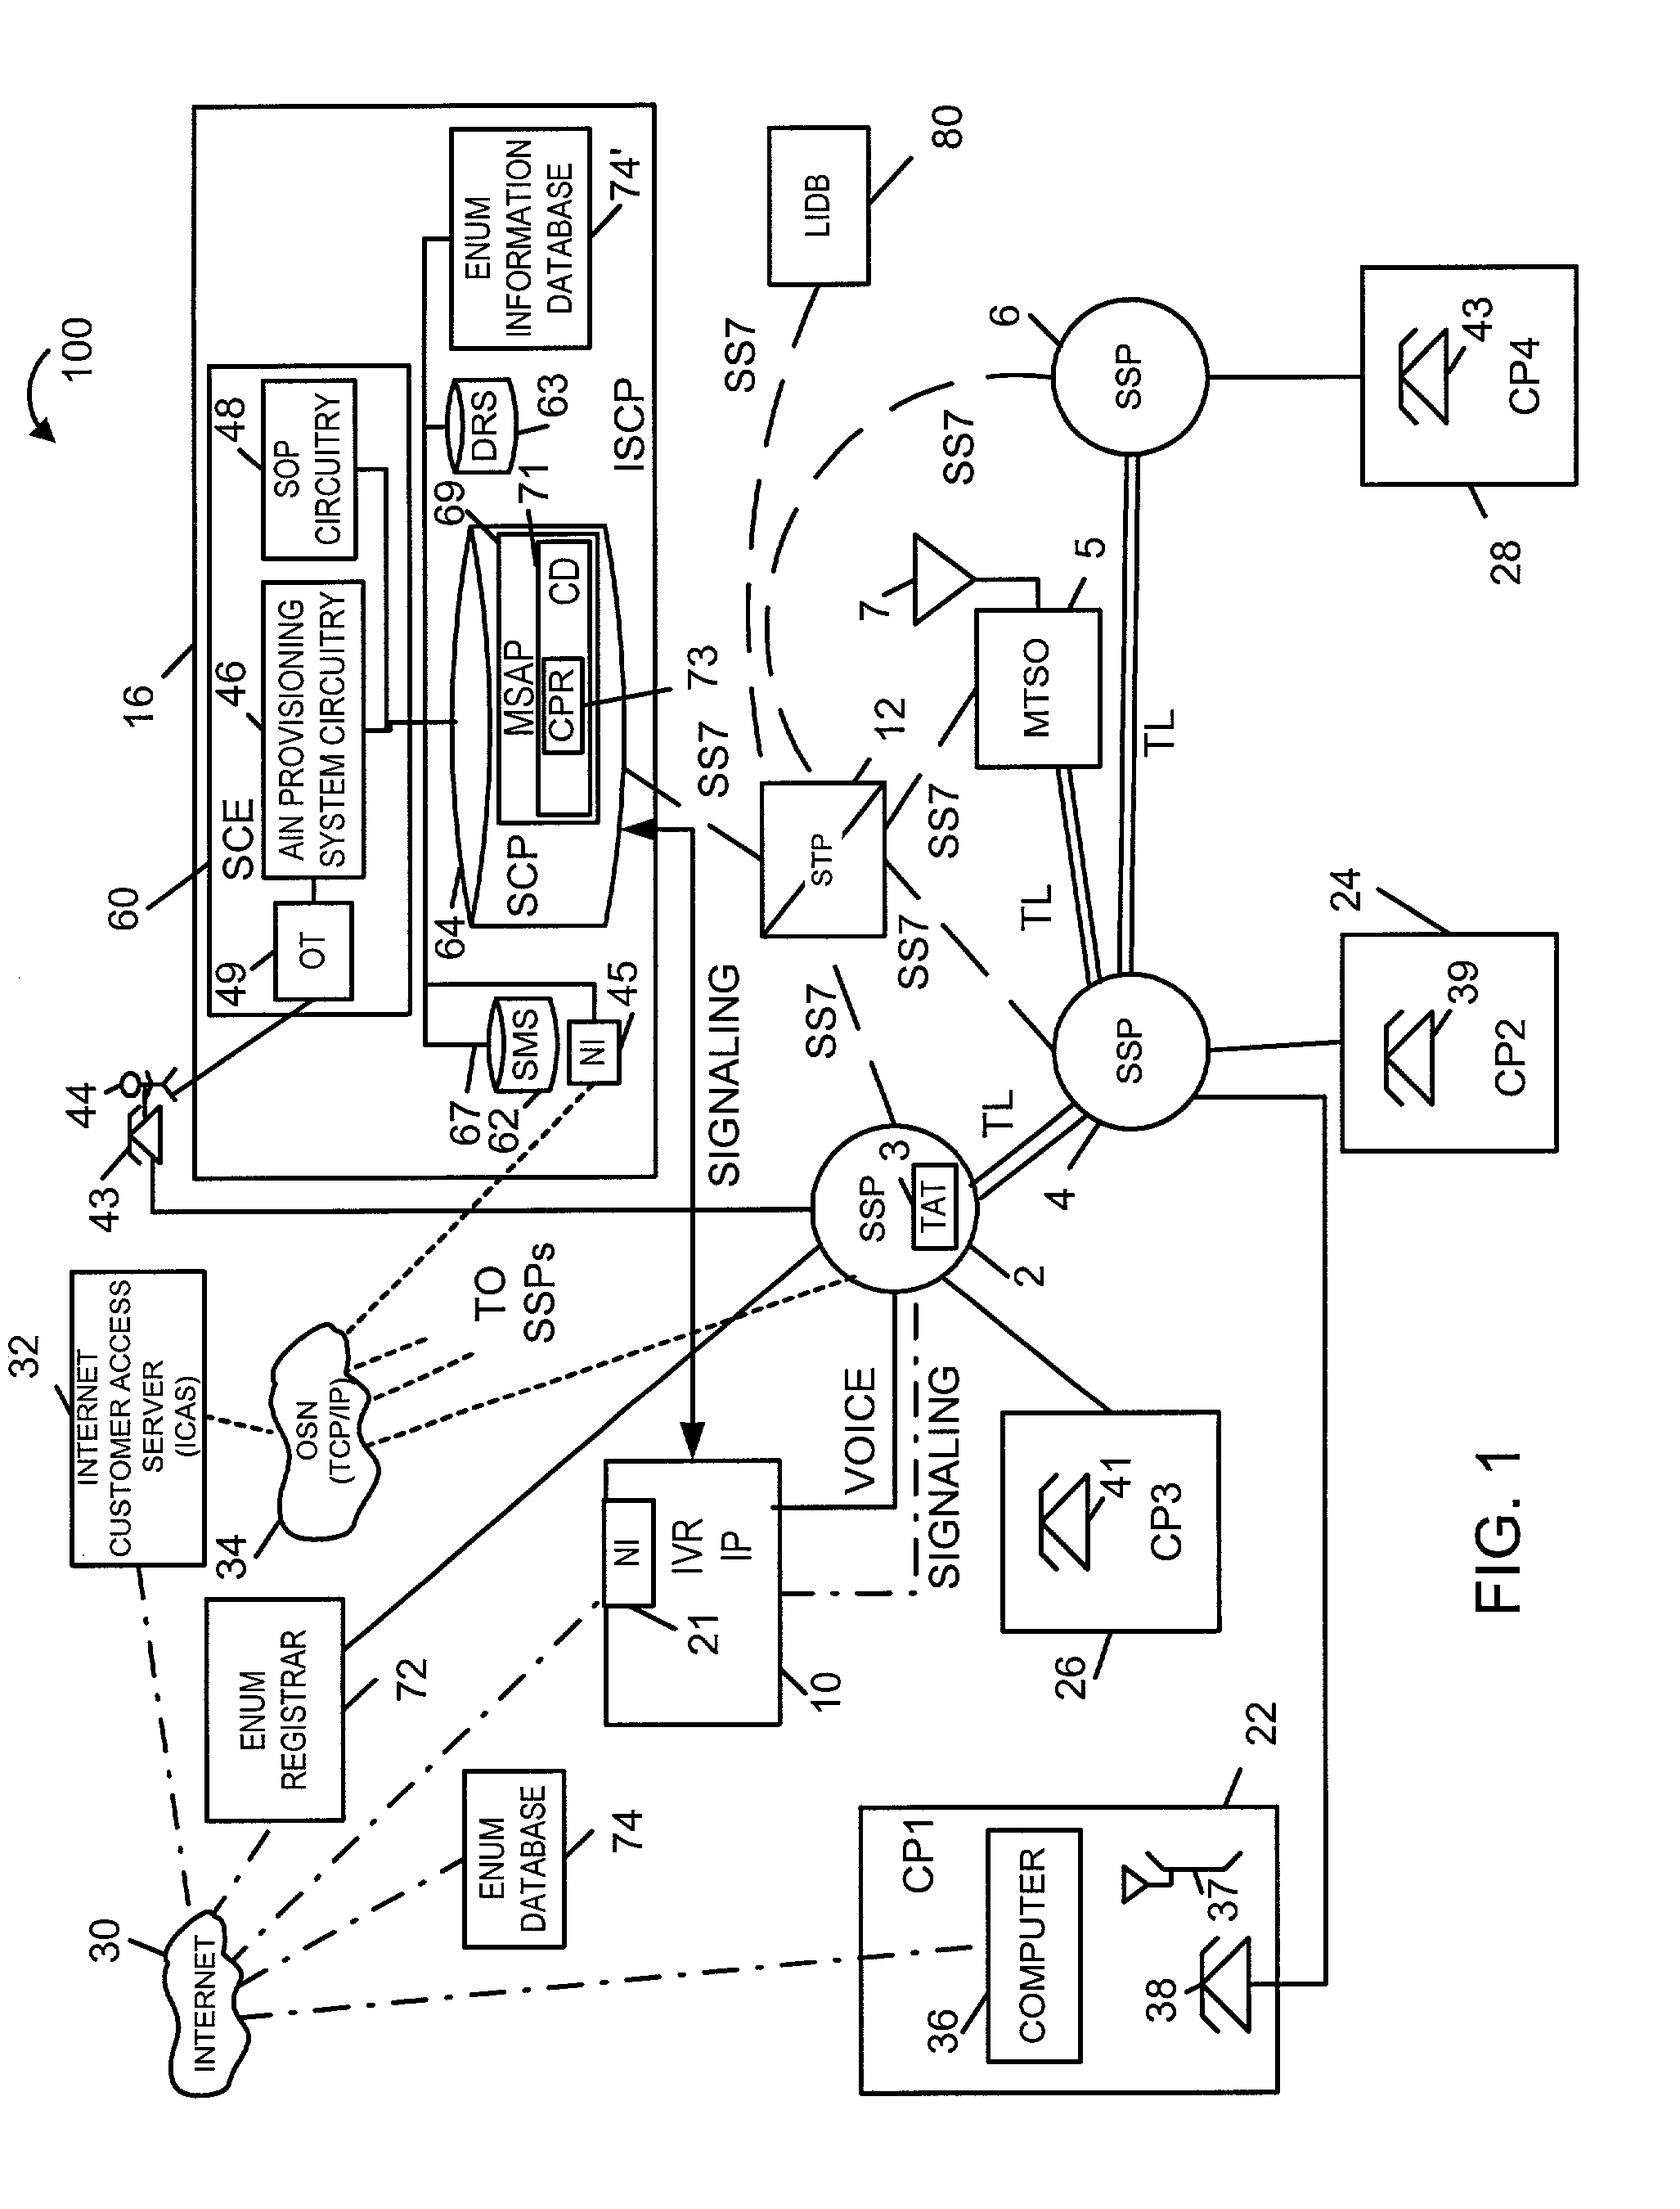 Methods and apparatus for authenticating and authorizing ENUM registrants